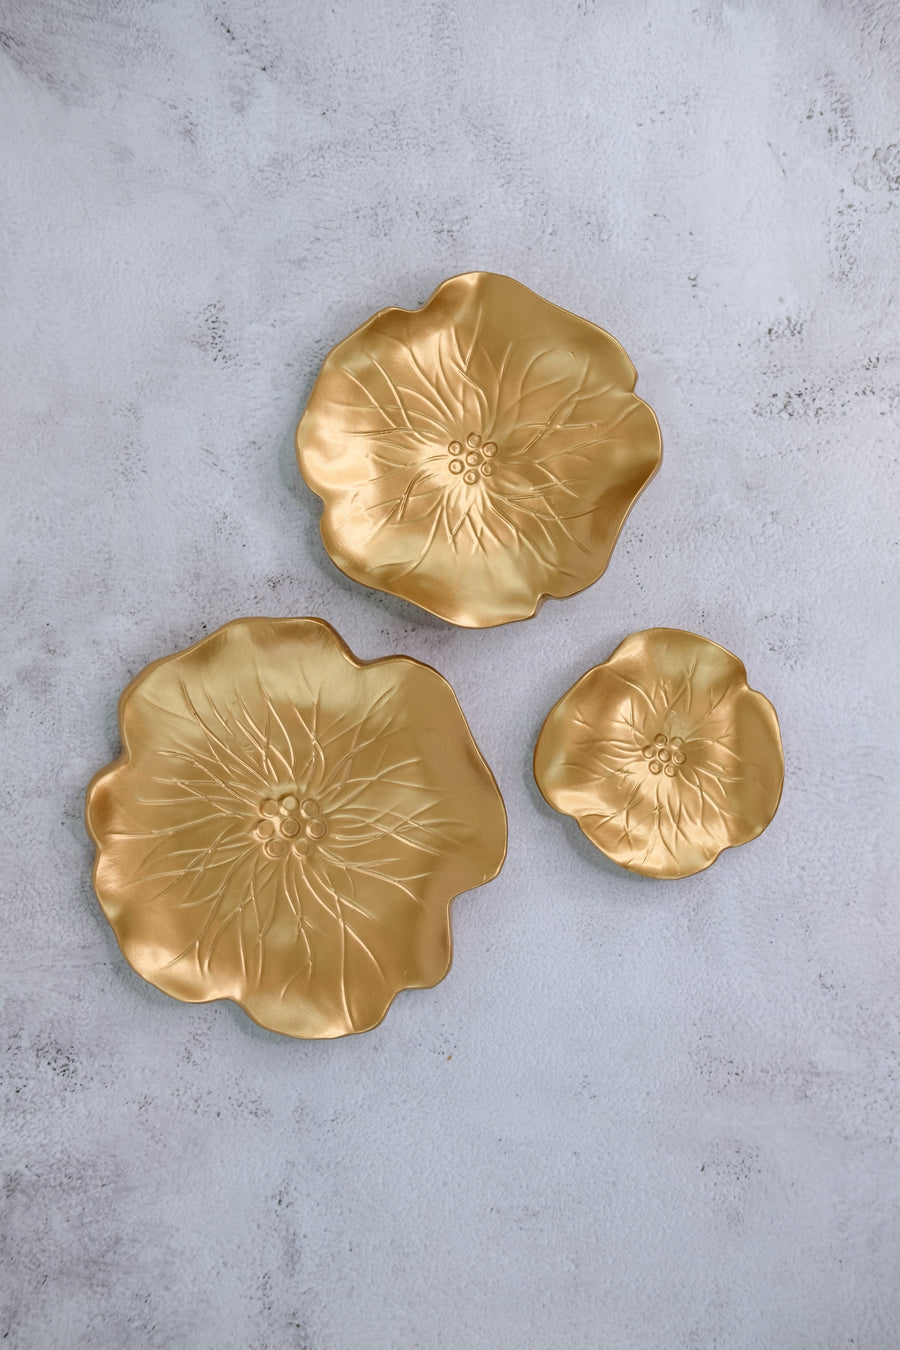 Water Flower Wall Decor in Gold